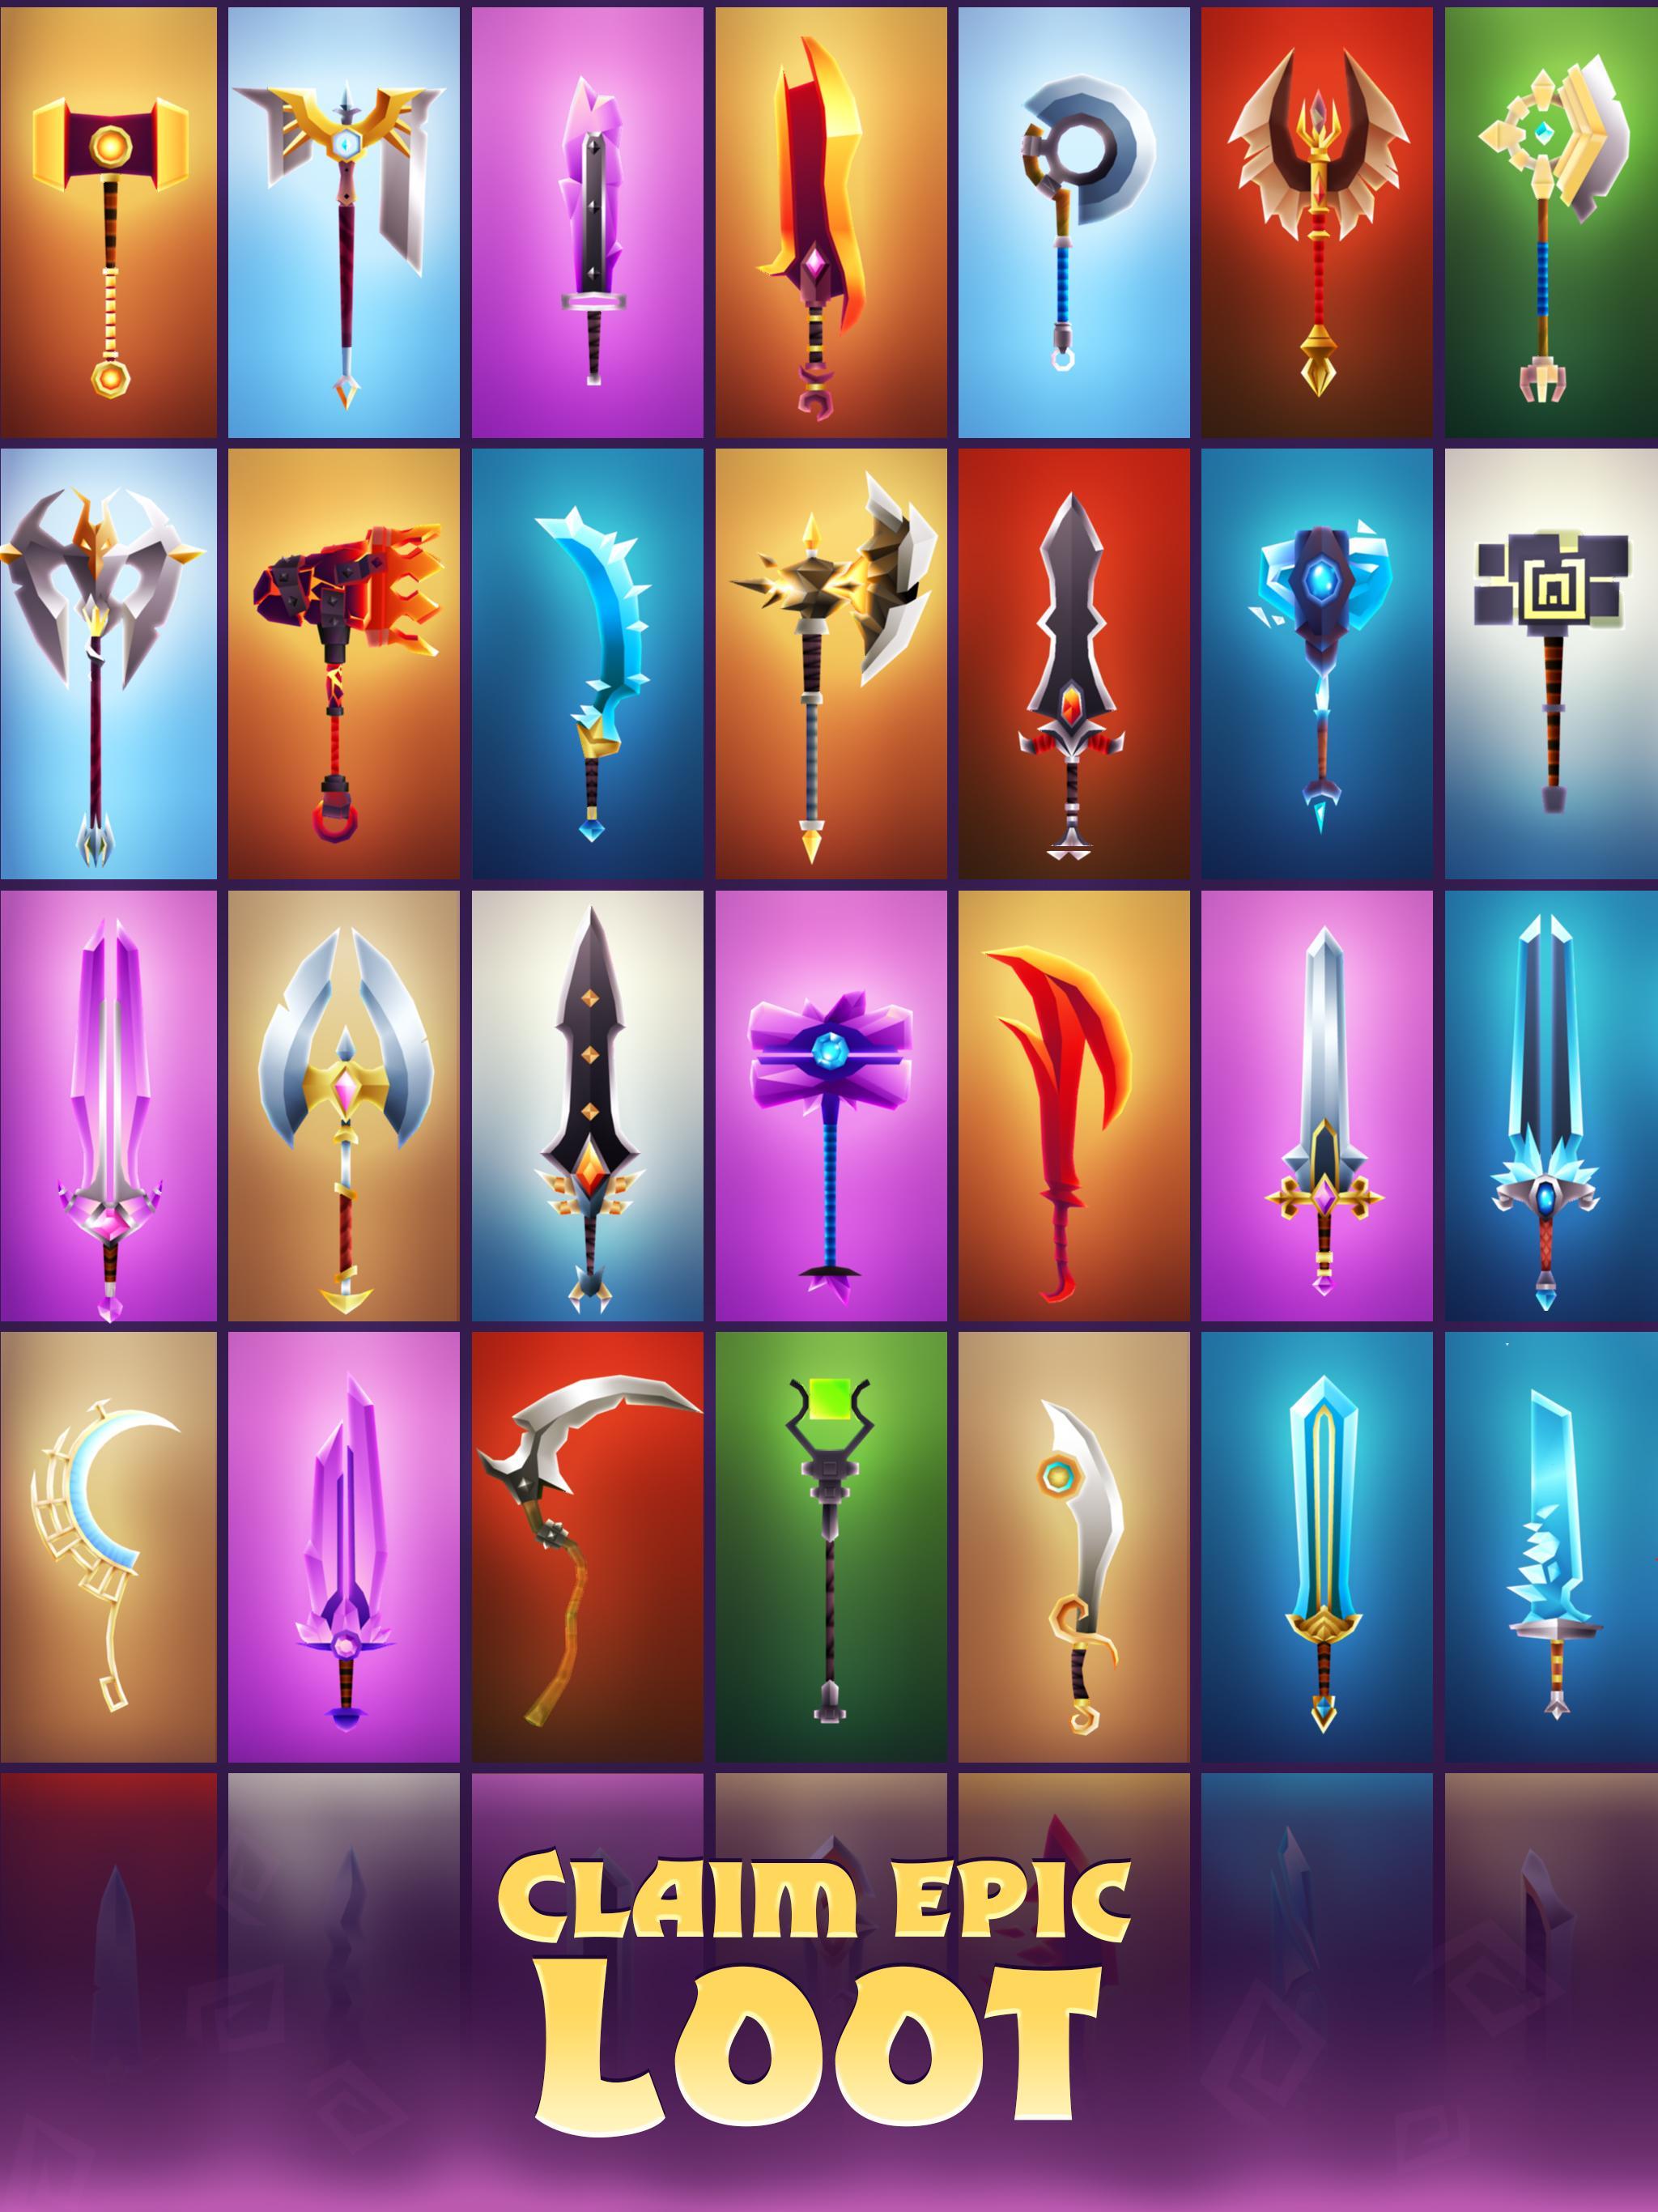 blades of brim characters